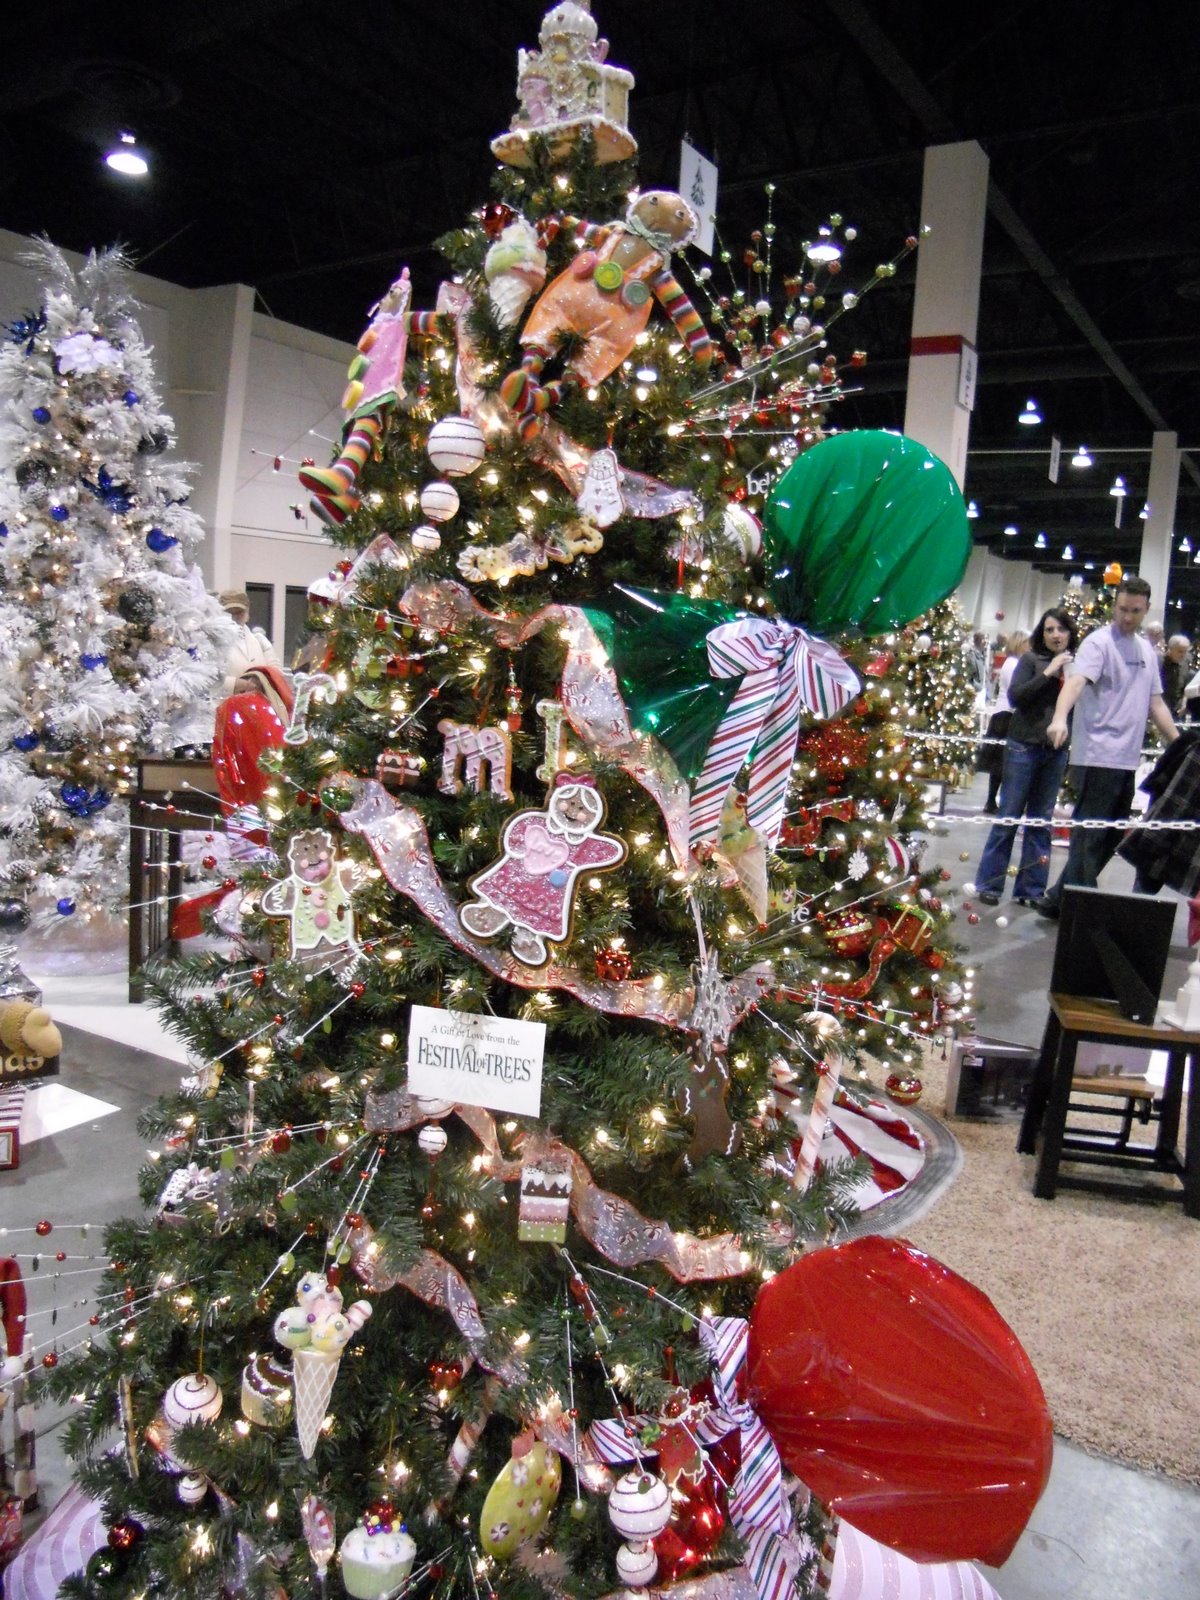 The Best of the Brown's: Festival of Trees